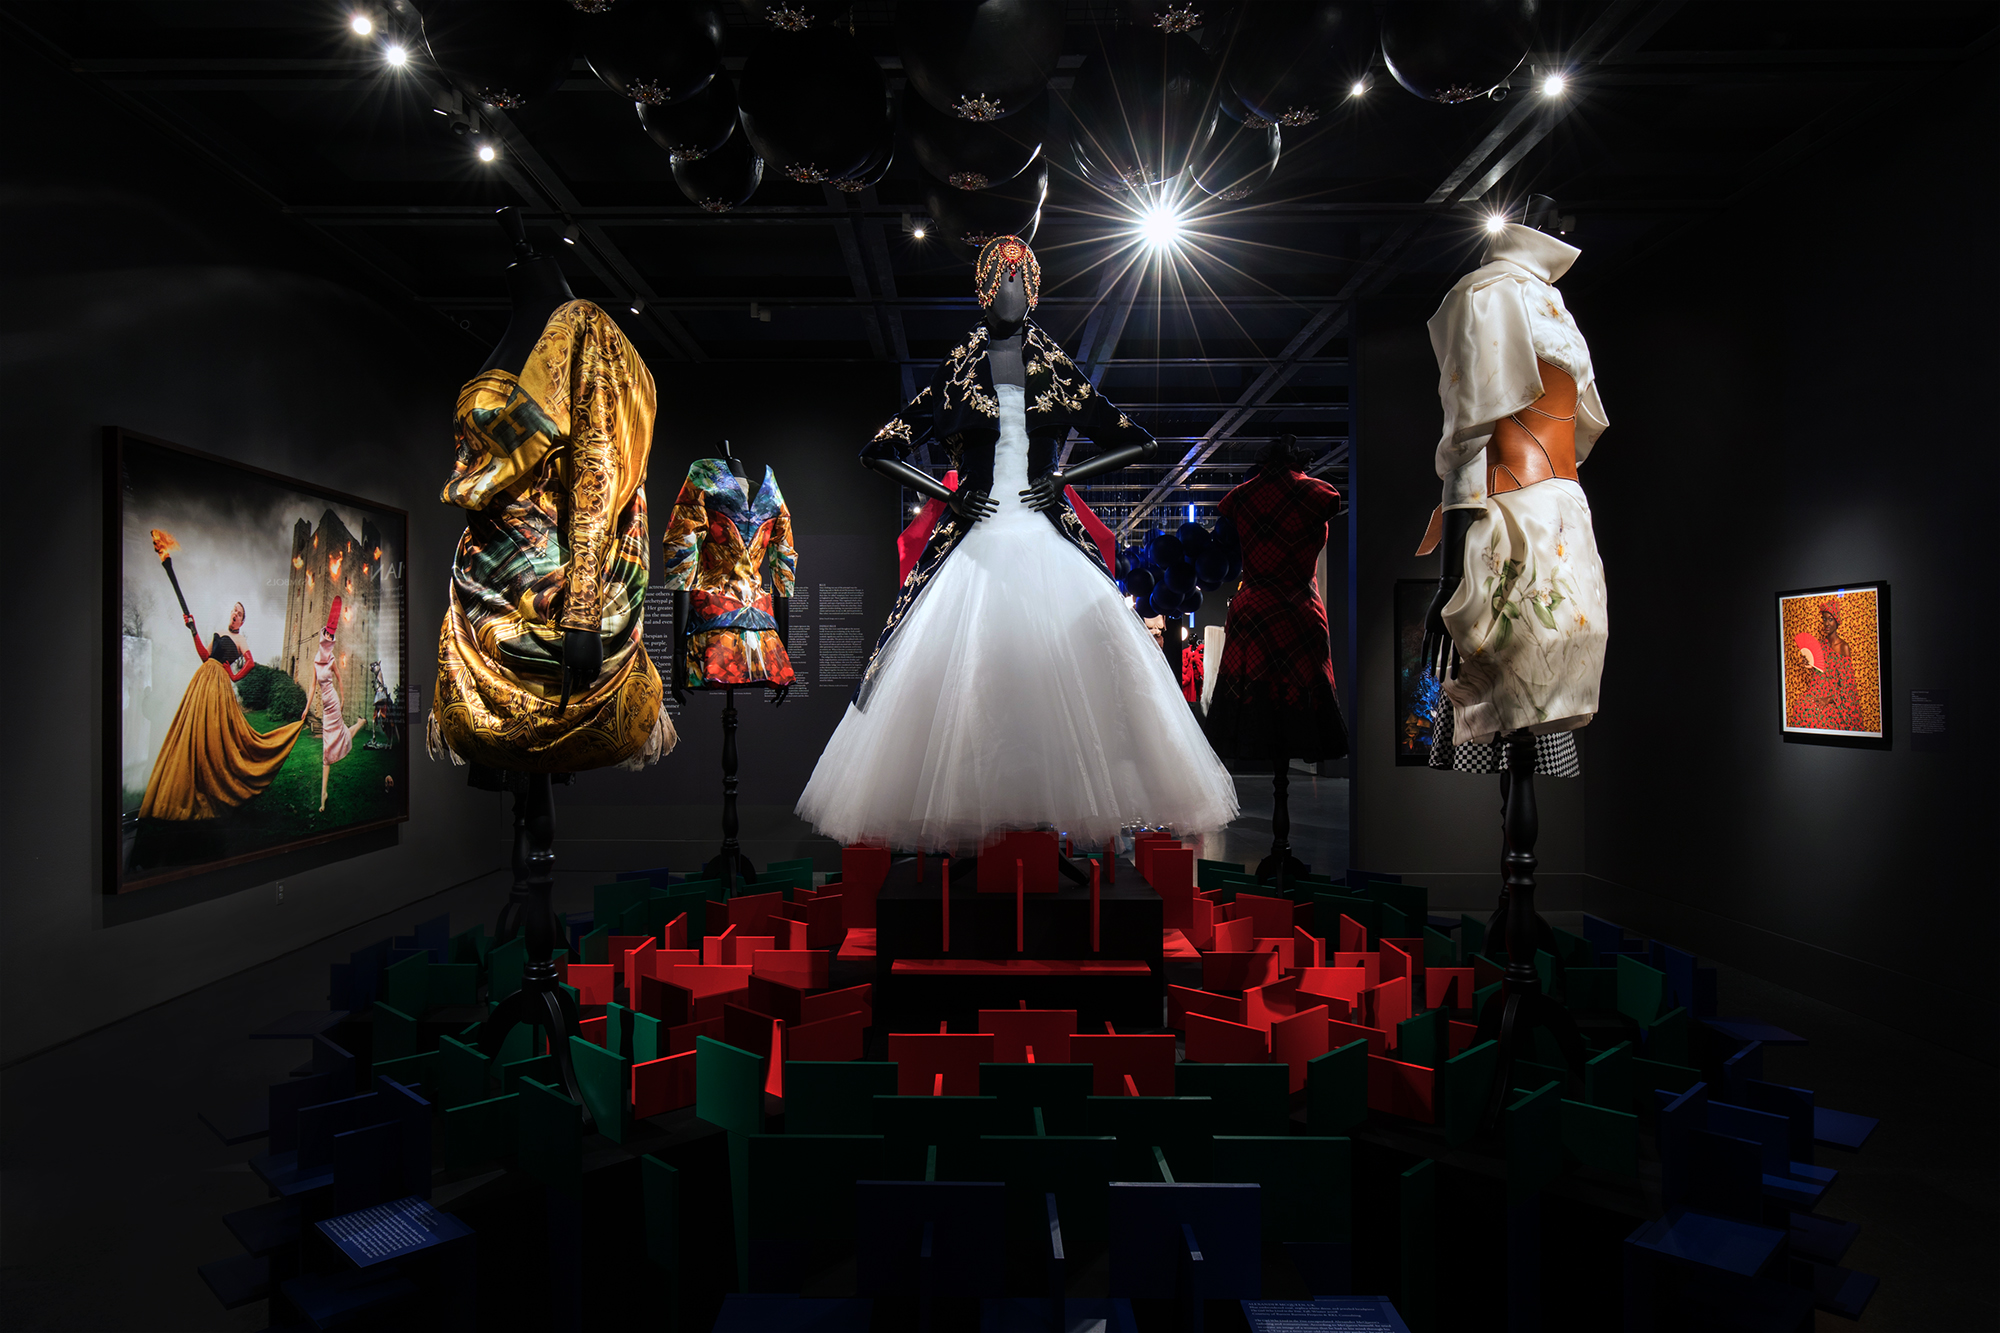 "A Queen Within" installation view. Image courtesy of the New Orleans Museum of Art.